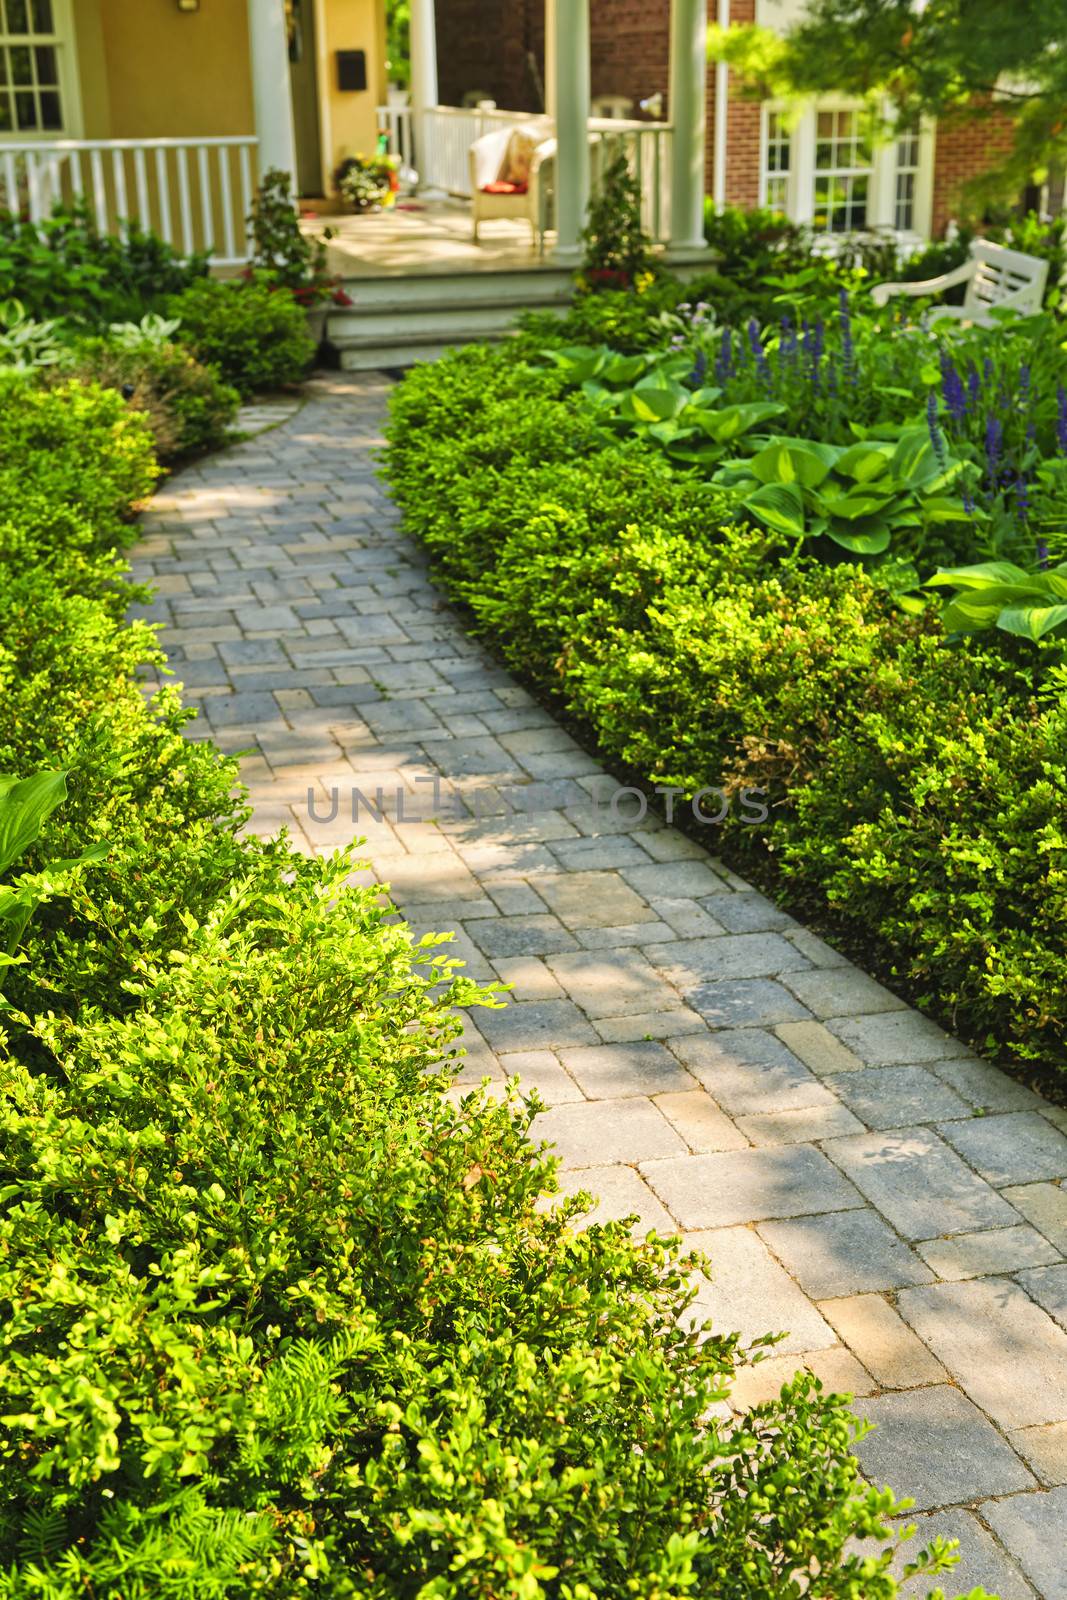 Paved stone path in lush green home garden